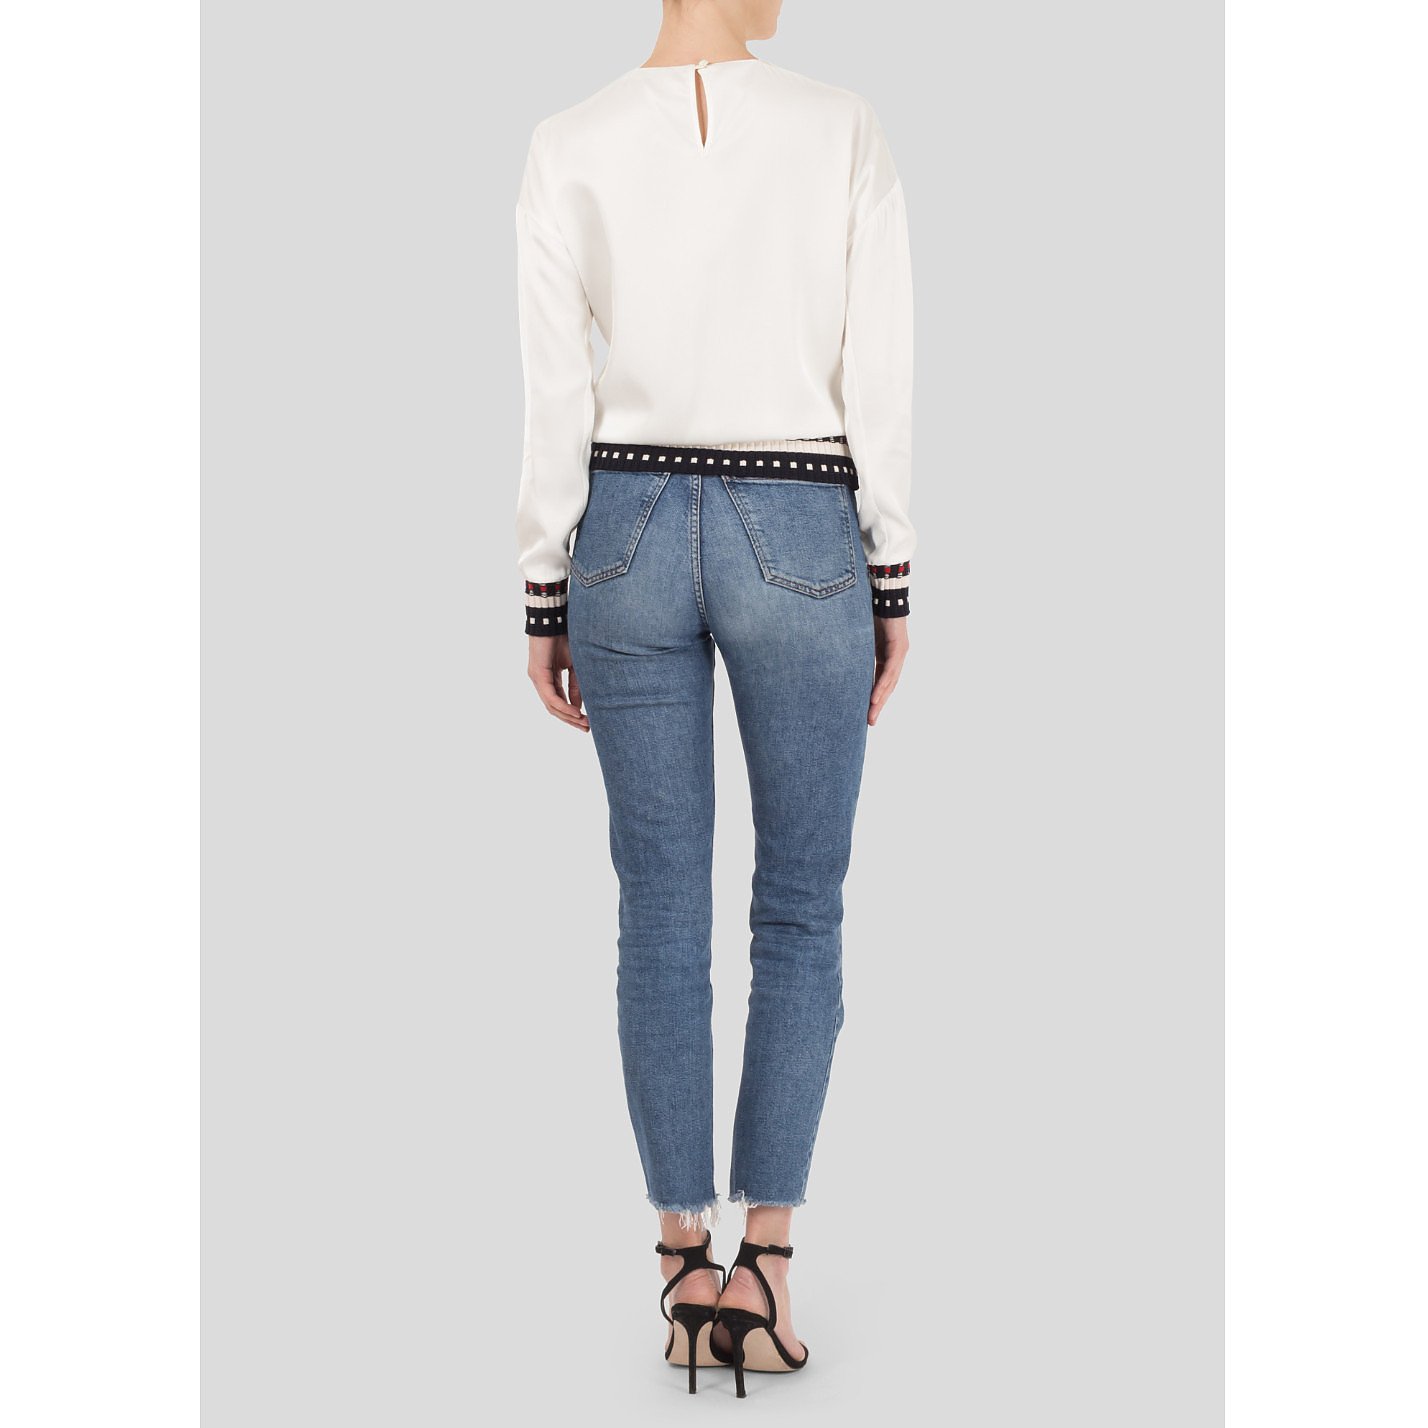 Victoria Beckham Top With Knitted Hem